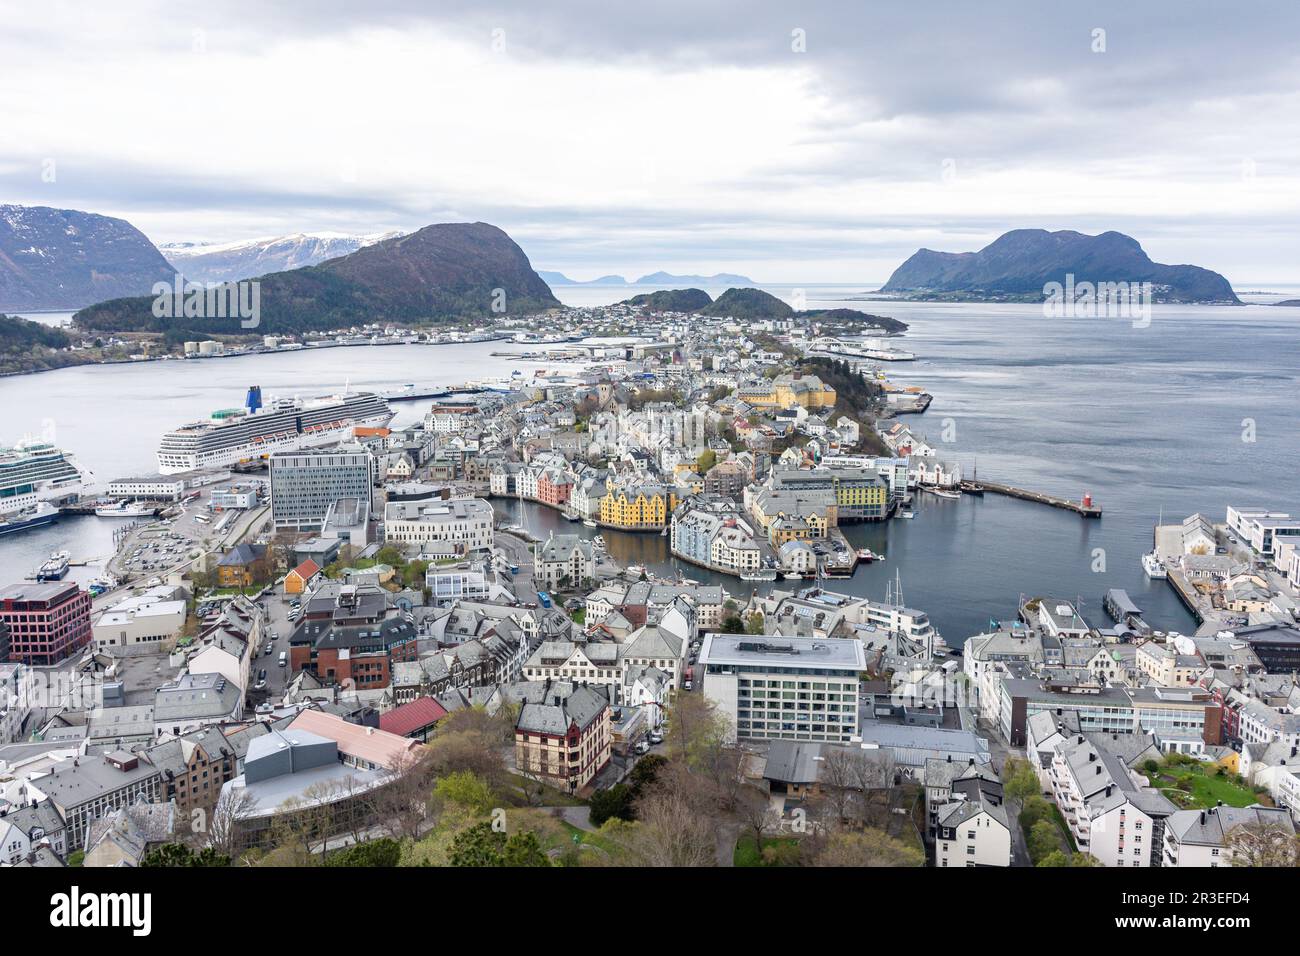 View of town centre from Aksla viewpoint, Ålesund, Møre og Romsdal, Norway Stock Photo